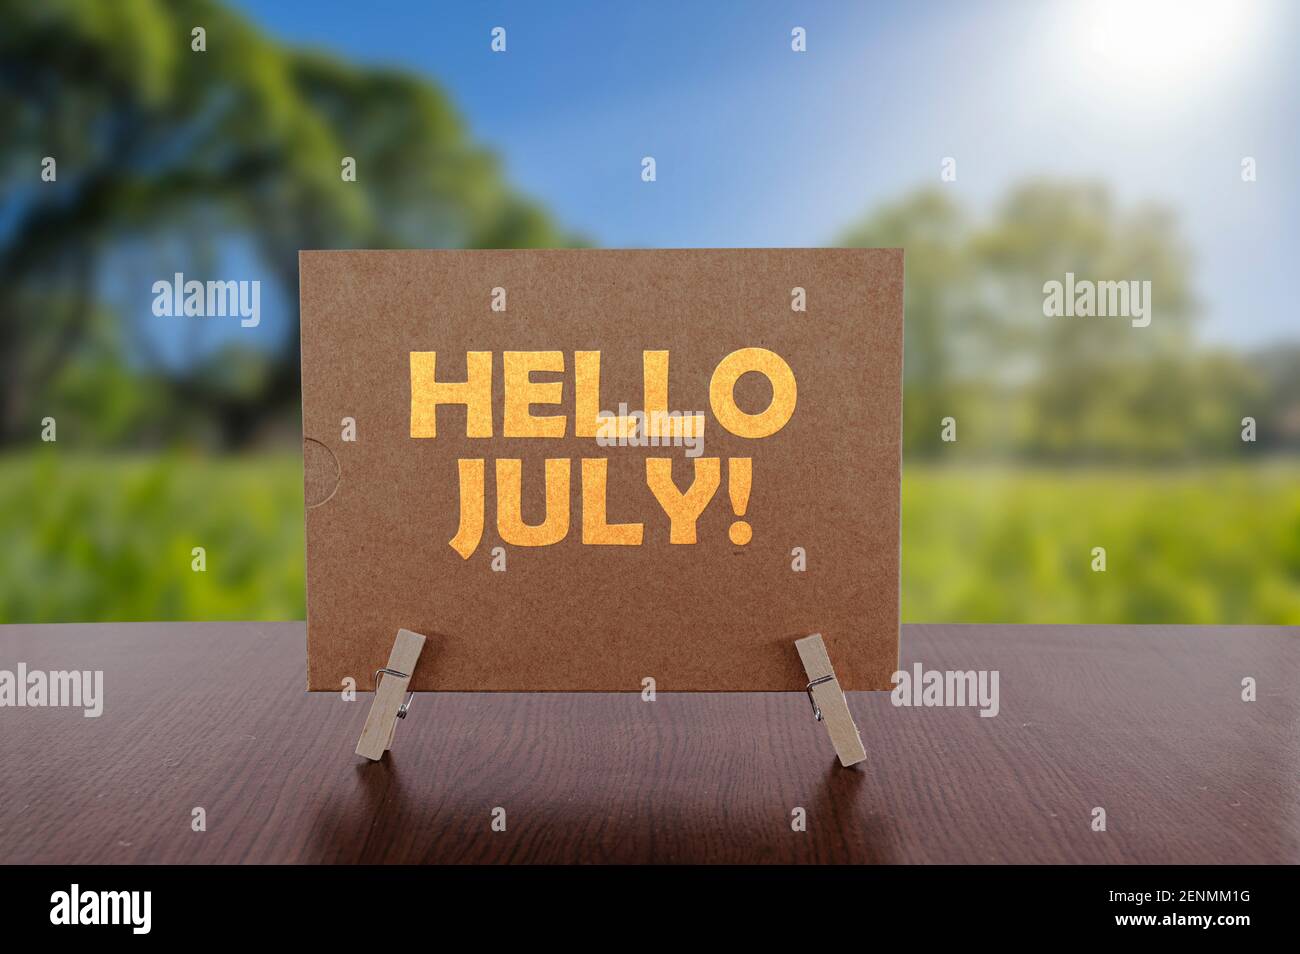 Hello july text on card on the table with sunny green park background. Stock Photo